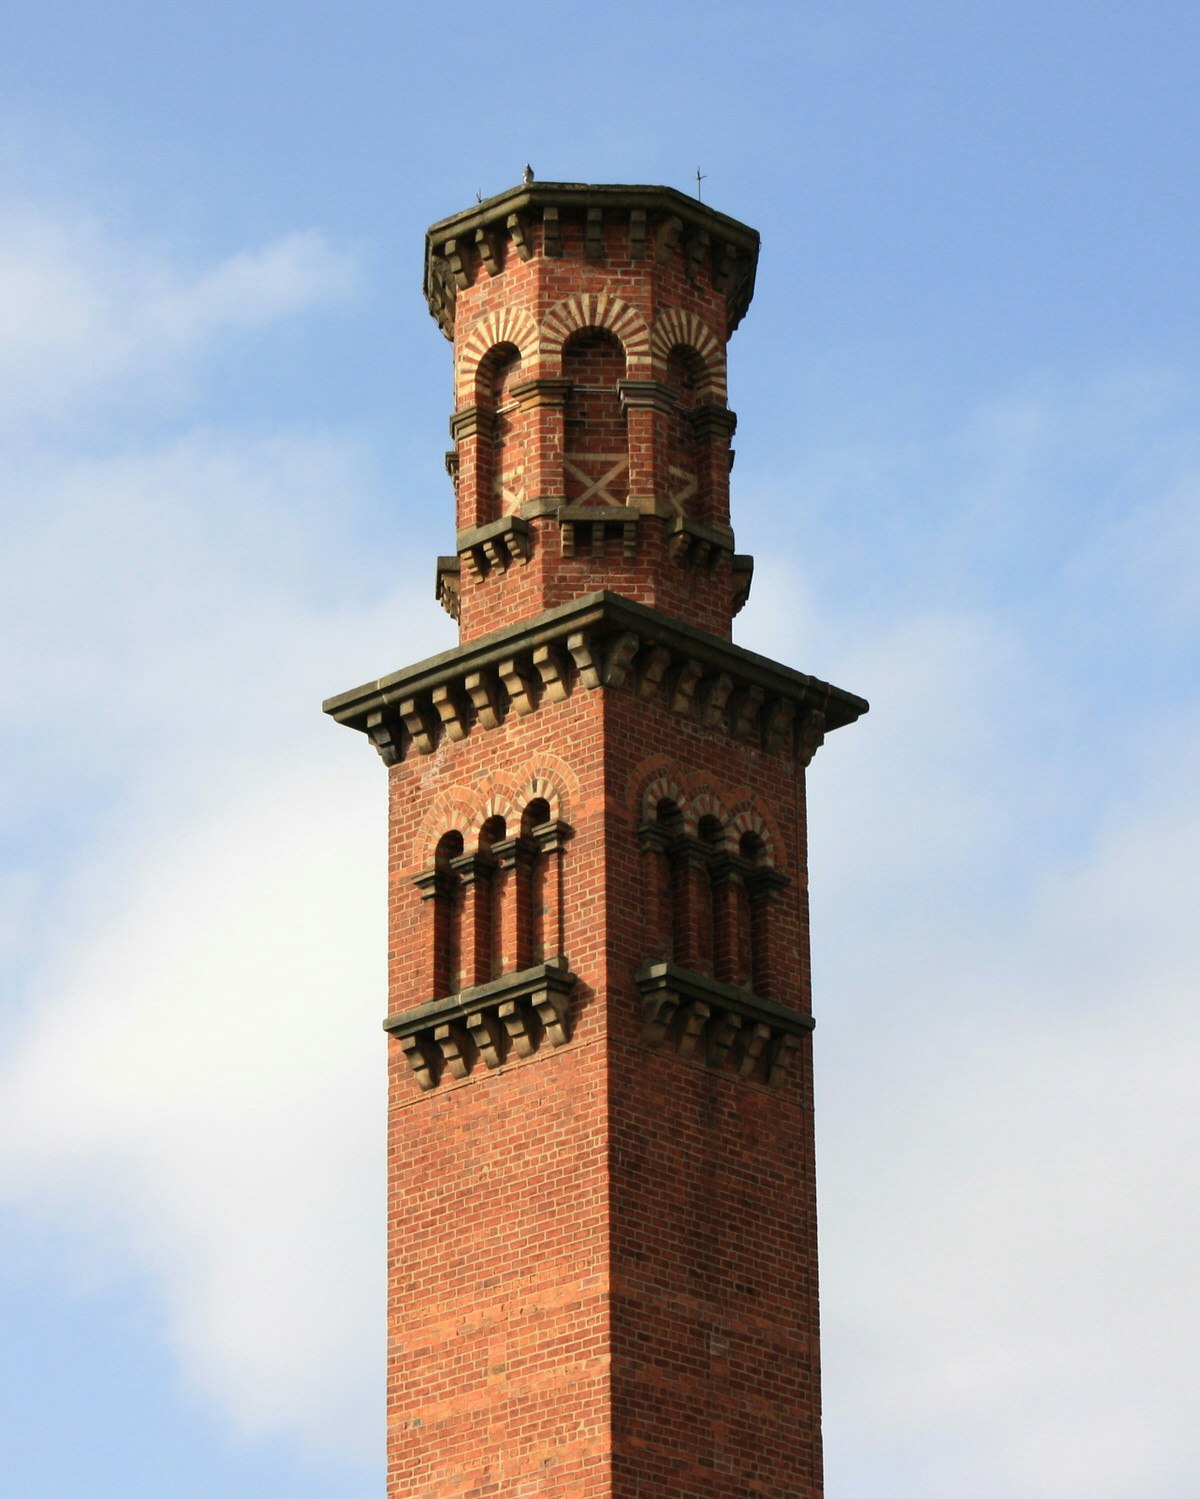 One of Tower Works' startling Italianate chimneys © Lorna Parkes / Lonely Planet